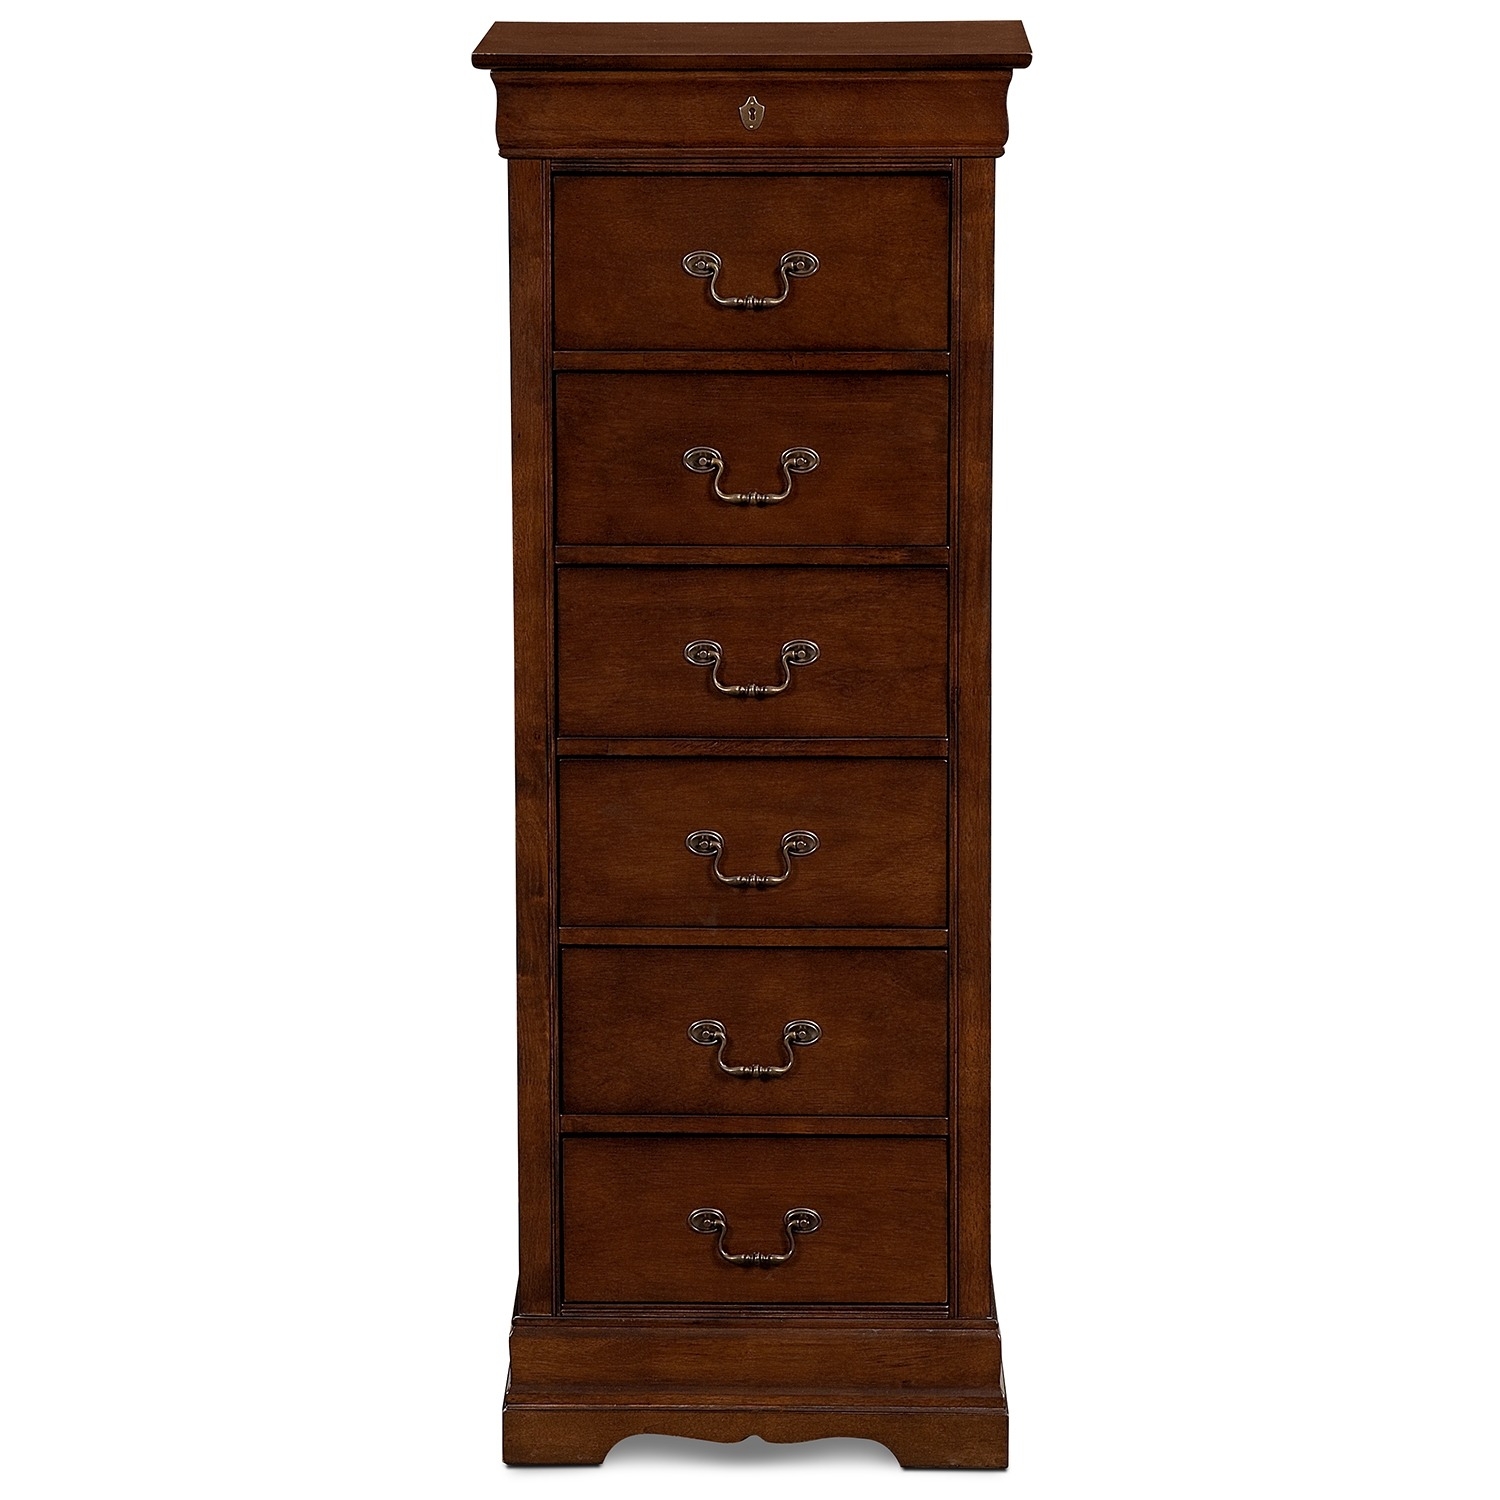 Bedroom furniture neo classic cherry lingerie chest